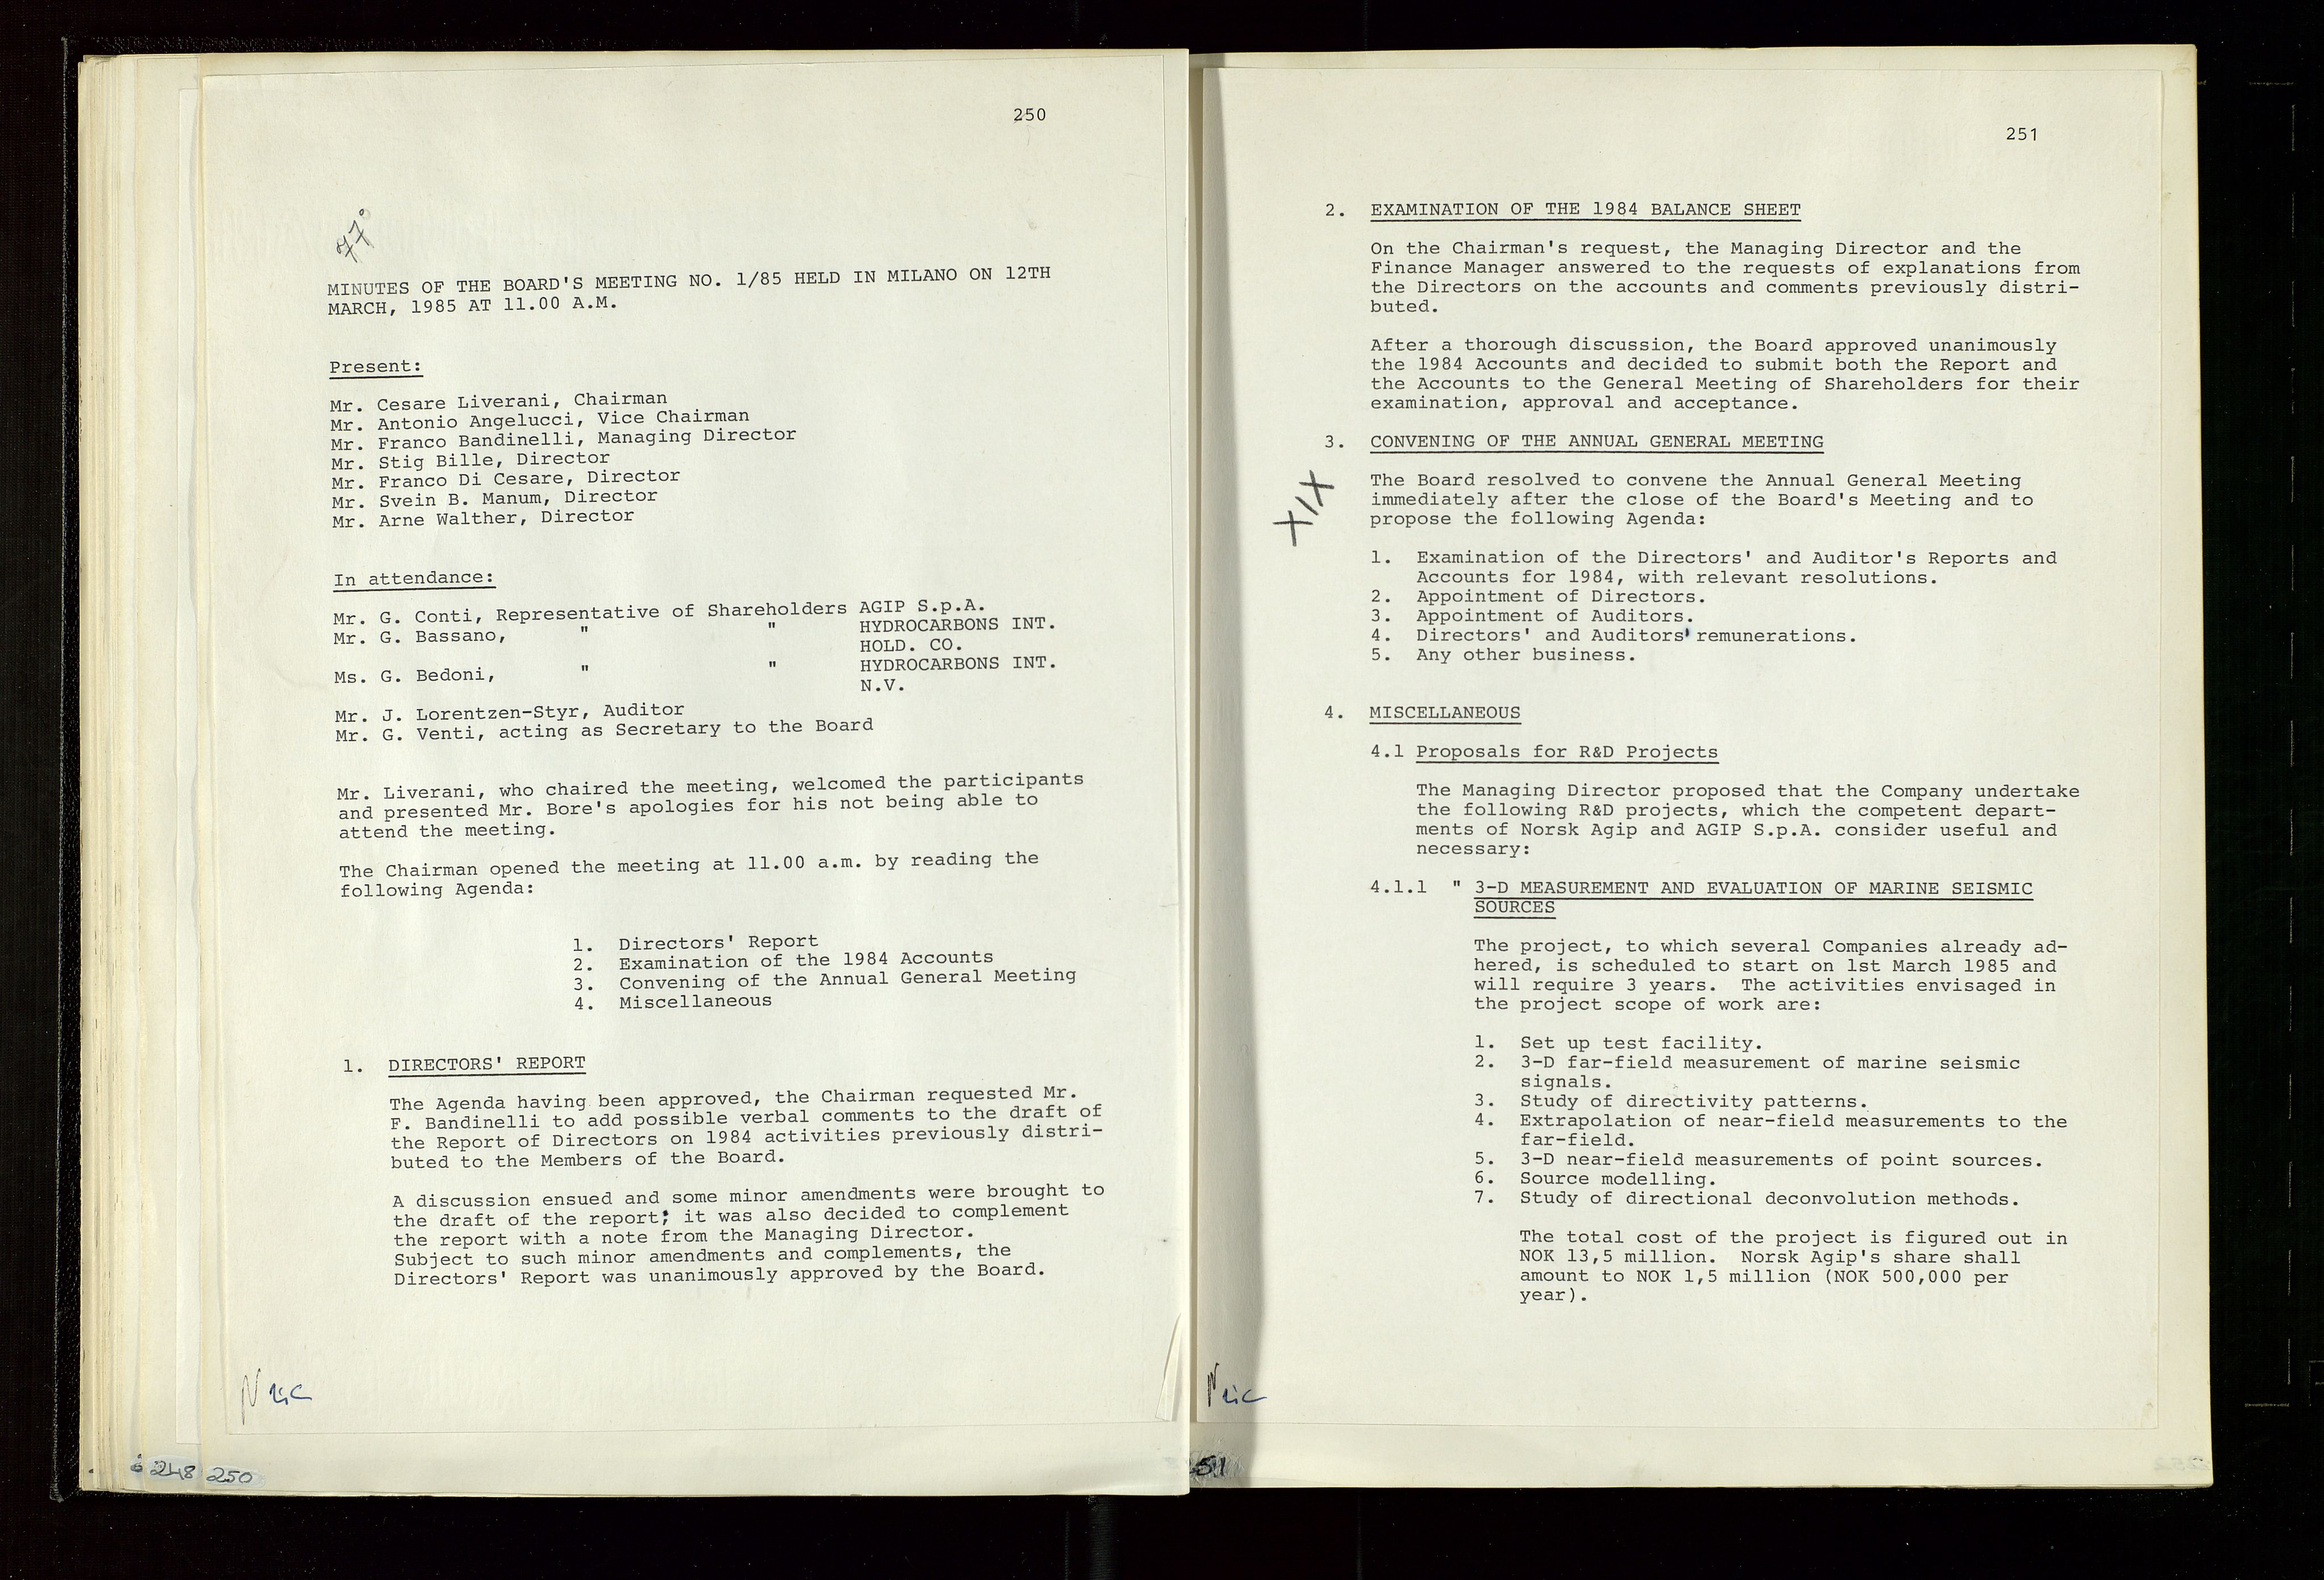 Pa 1583 - Norsk Agip AS, SAST/A-102138/A/Aa/L0003: Board of Directors meeting minutes, 1979-1983, s. 250-251